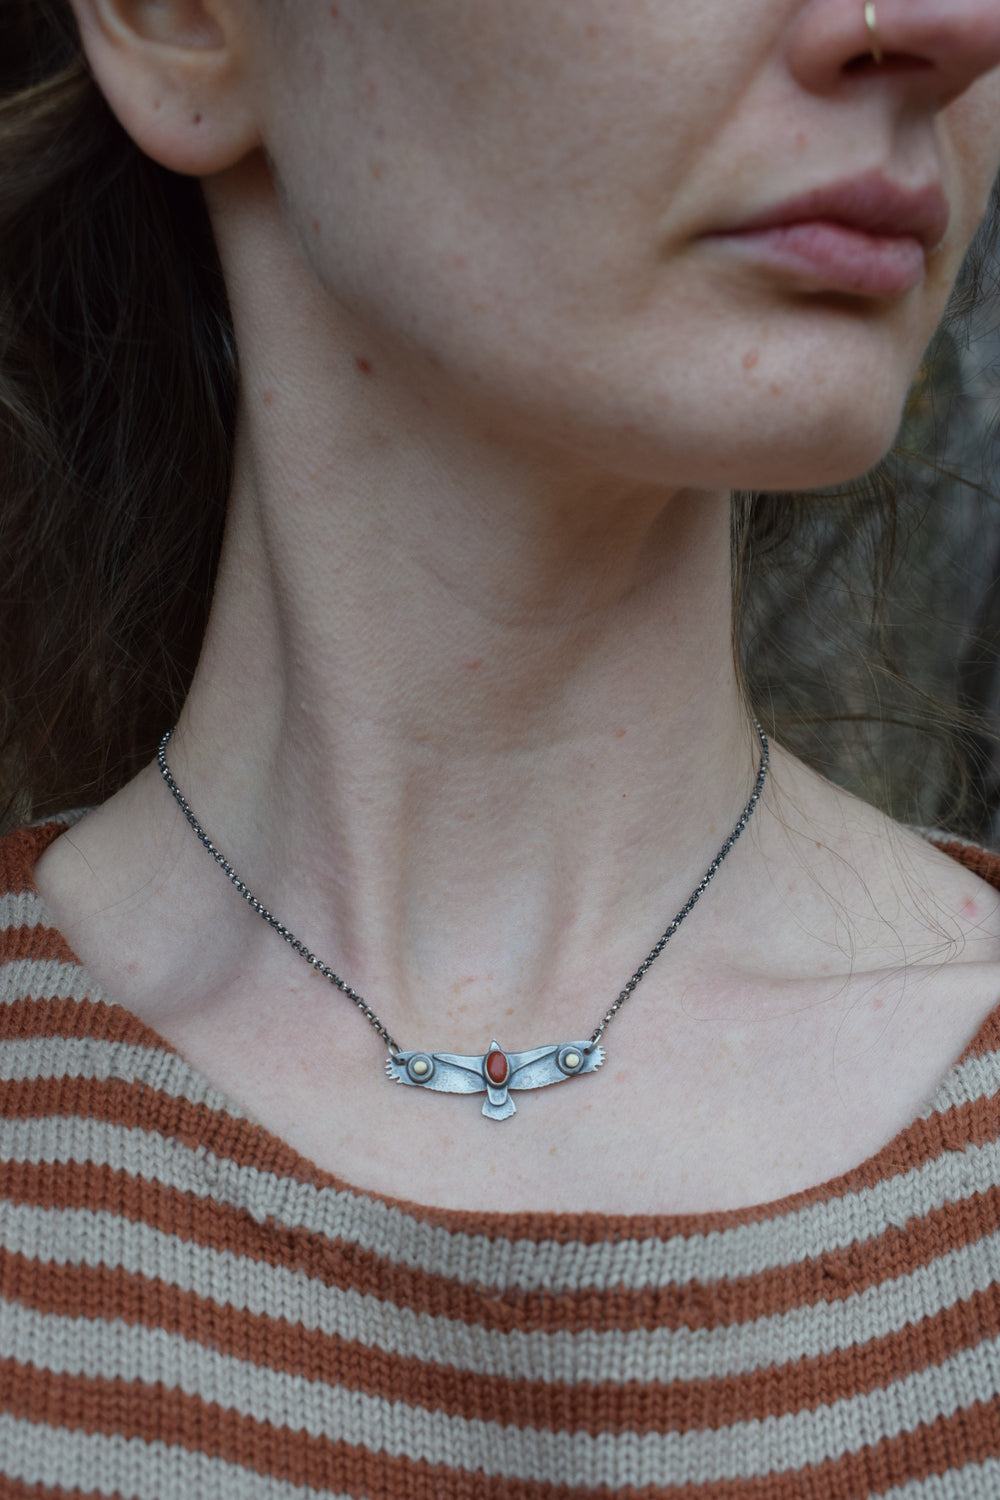 Soar Necklace - Made to Order